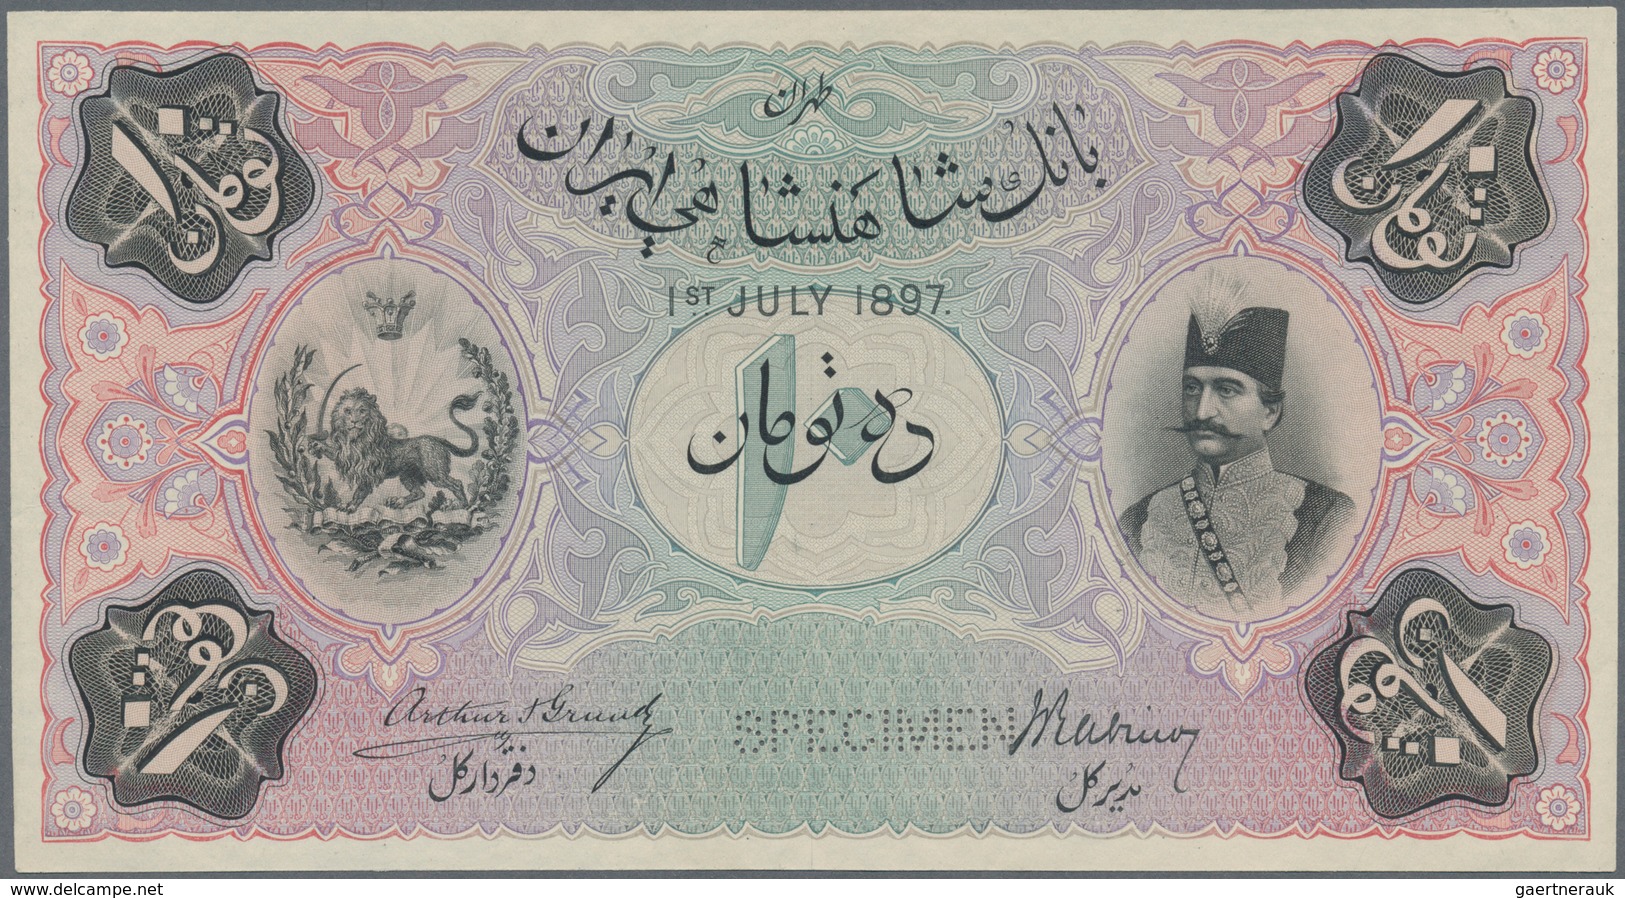 01787 Iran: Imperial Bank Of Persia Front And Reverse Specimen Of 10 Toman July 1st 1897, Printed By Bradb - Iran